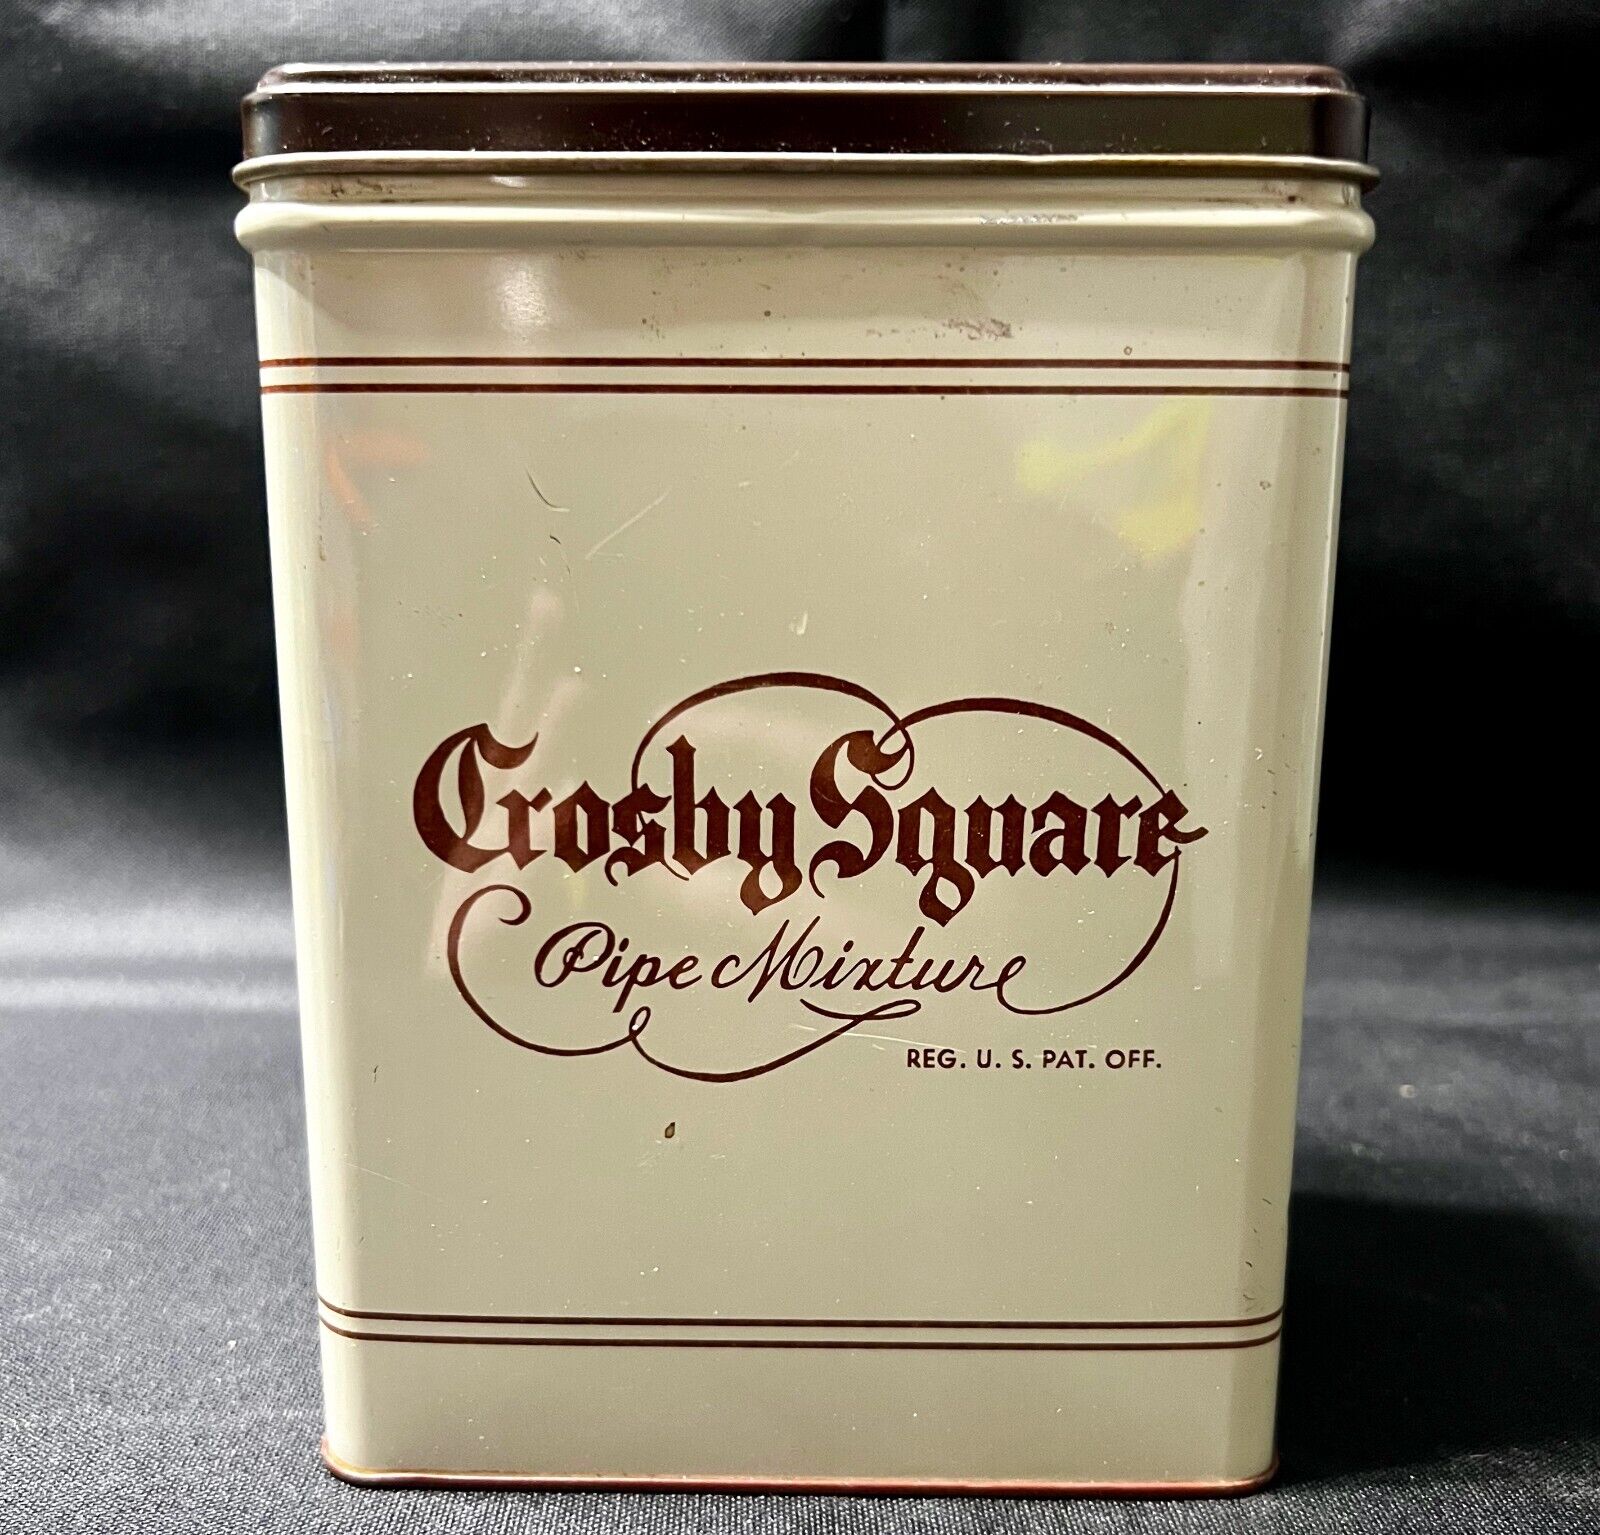 Vintage Crosby Square, Pipe Mixture Tin, Empty Advertising Tin